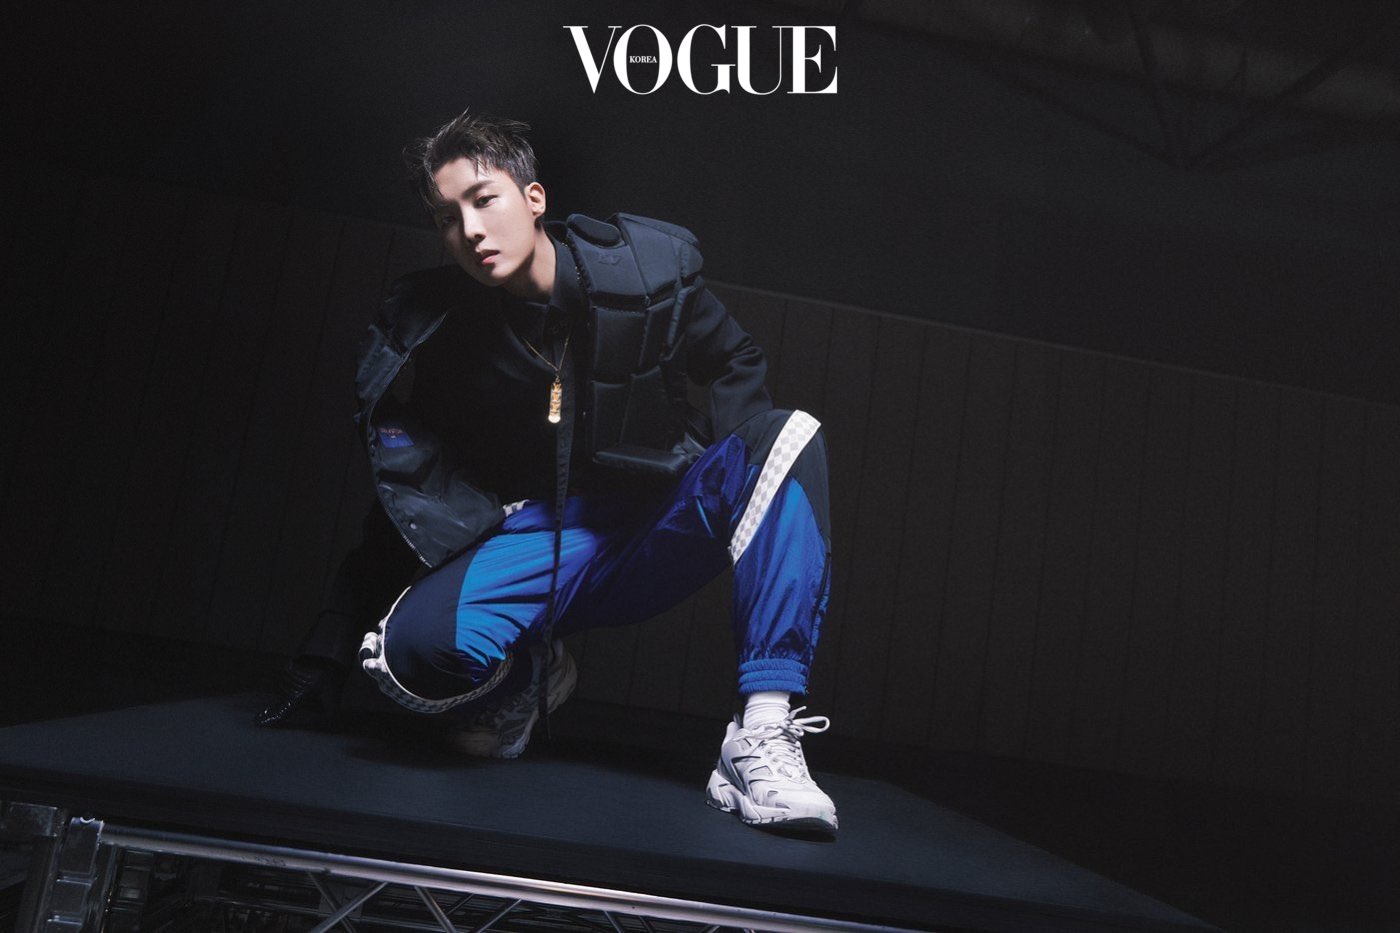 j-hope India fanbase¹³⁷ on X: [Photos j-hope] GQ VOGUE KOREA  January  issue with BTS & Louis Vuitton Good lord !! The JUNG HOSEOK 😱🔥 (1) # JHOPE #제이홉 #BTS @BTS_twt #jhopeindia #uarmyhope